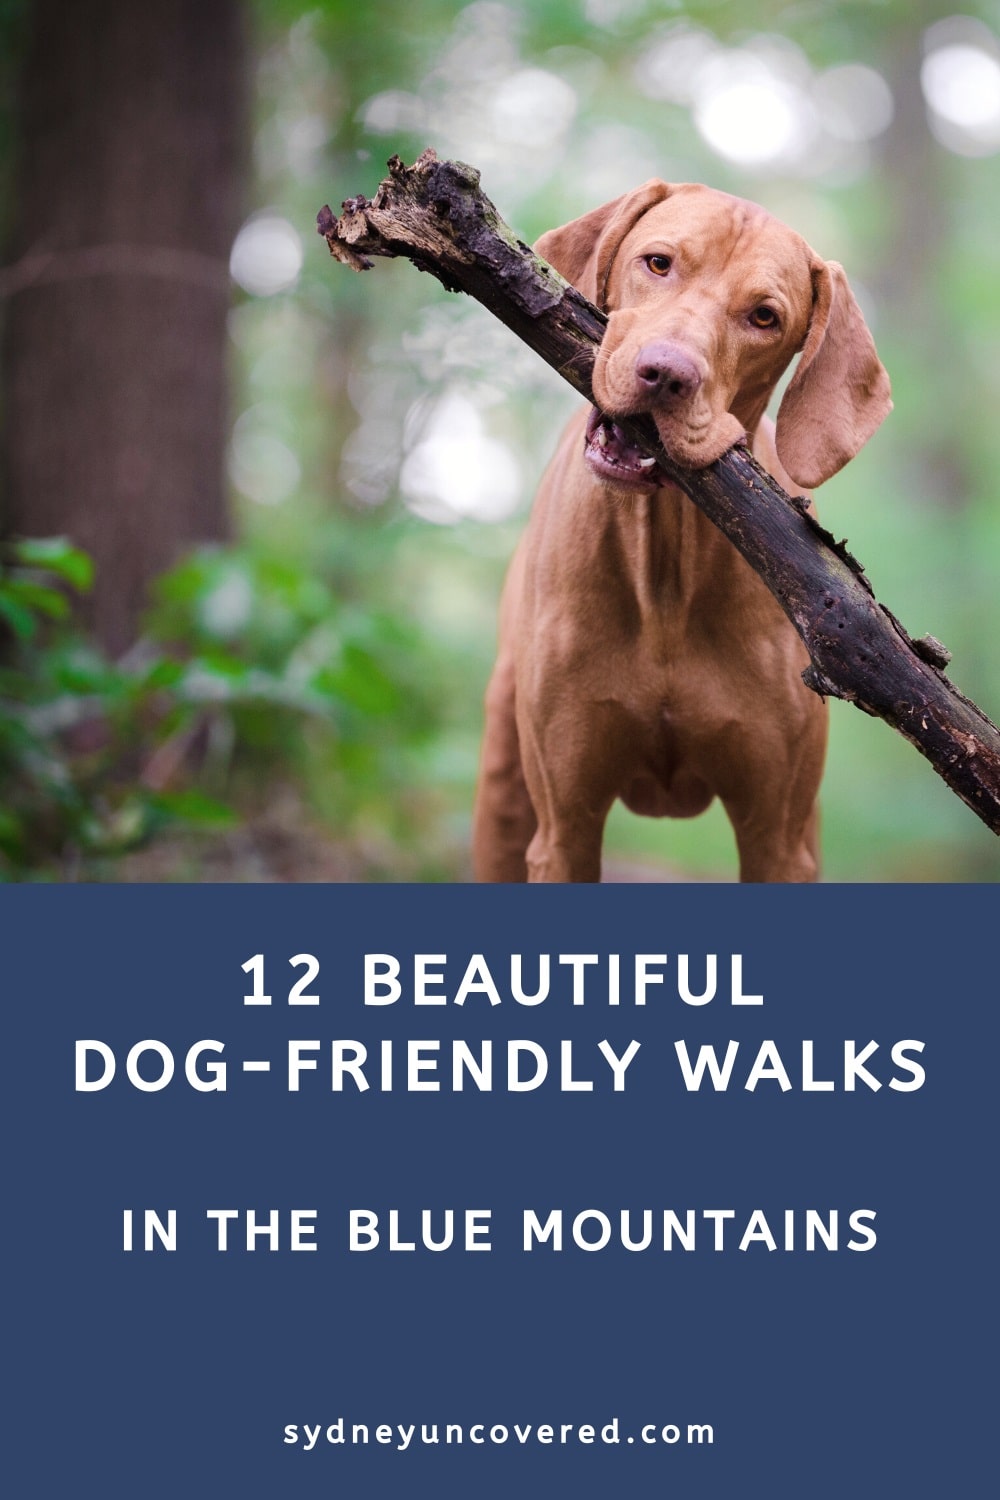 12 Dog-friendly walks in the Blue Mountains